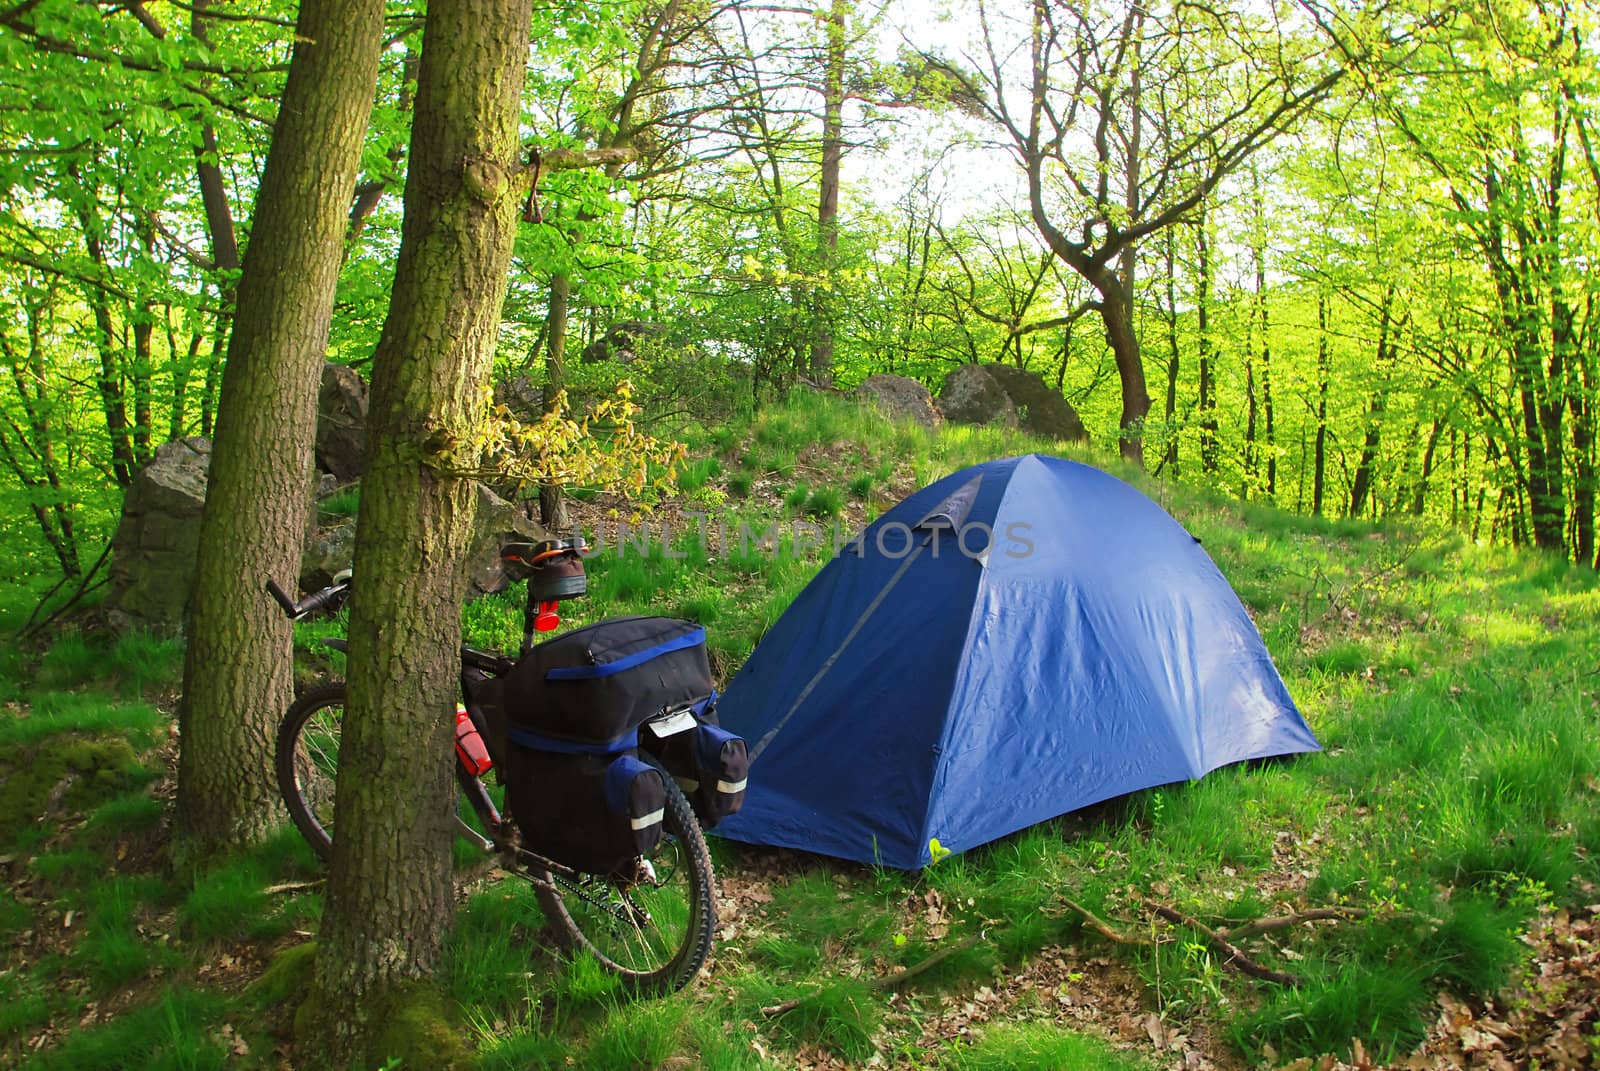 Biker is camping with the tent in green forest